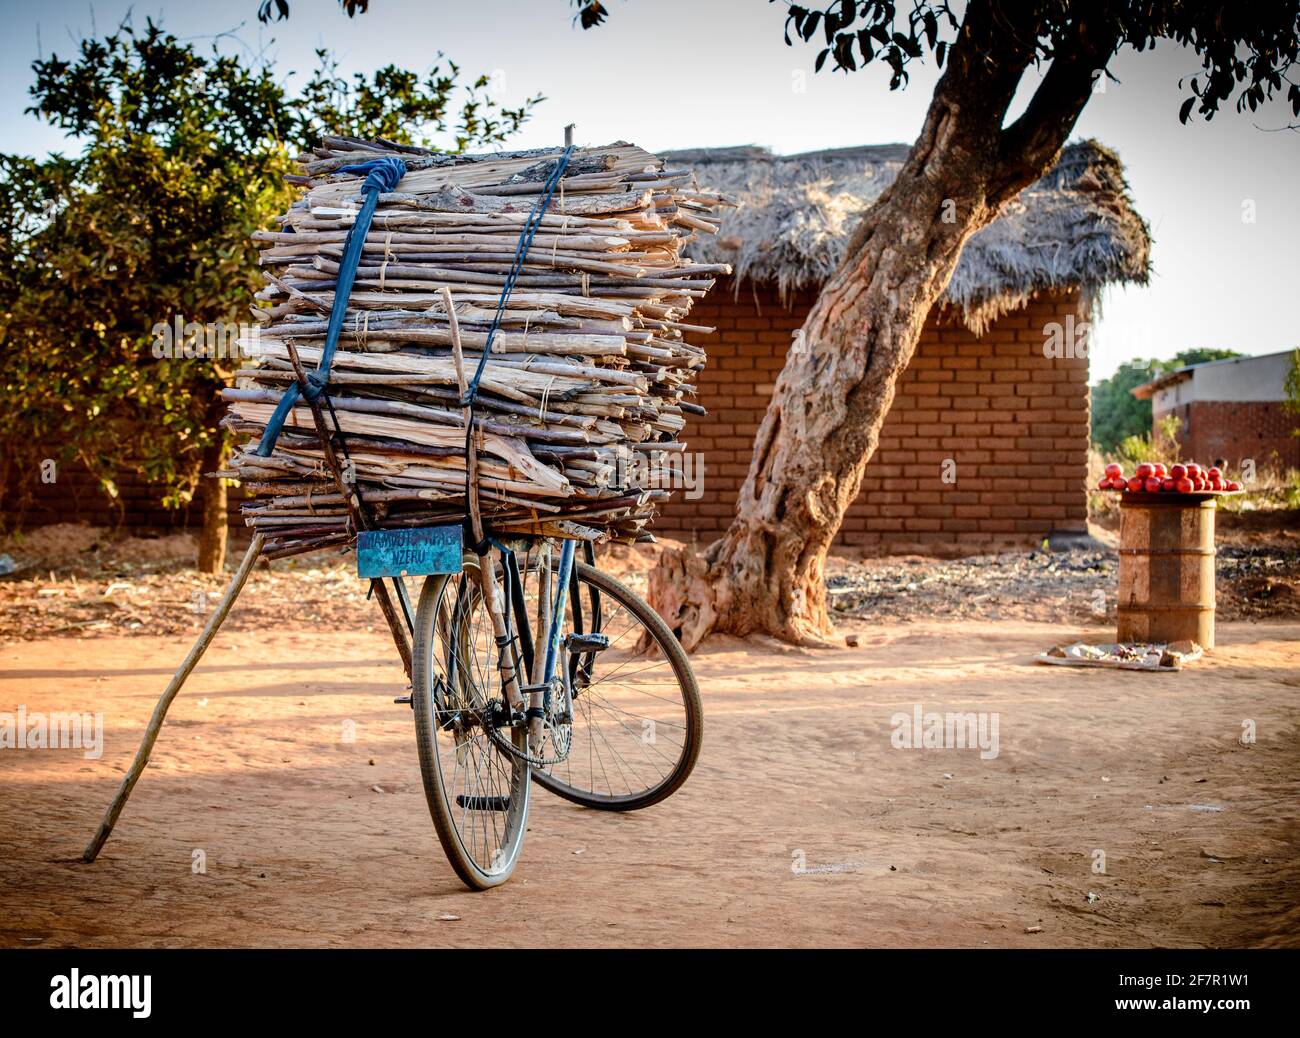 Bicycle standing with large load of firewood in Malawi village Stock Photo